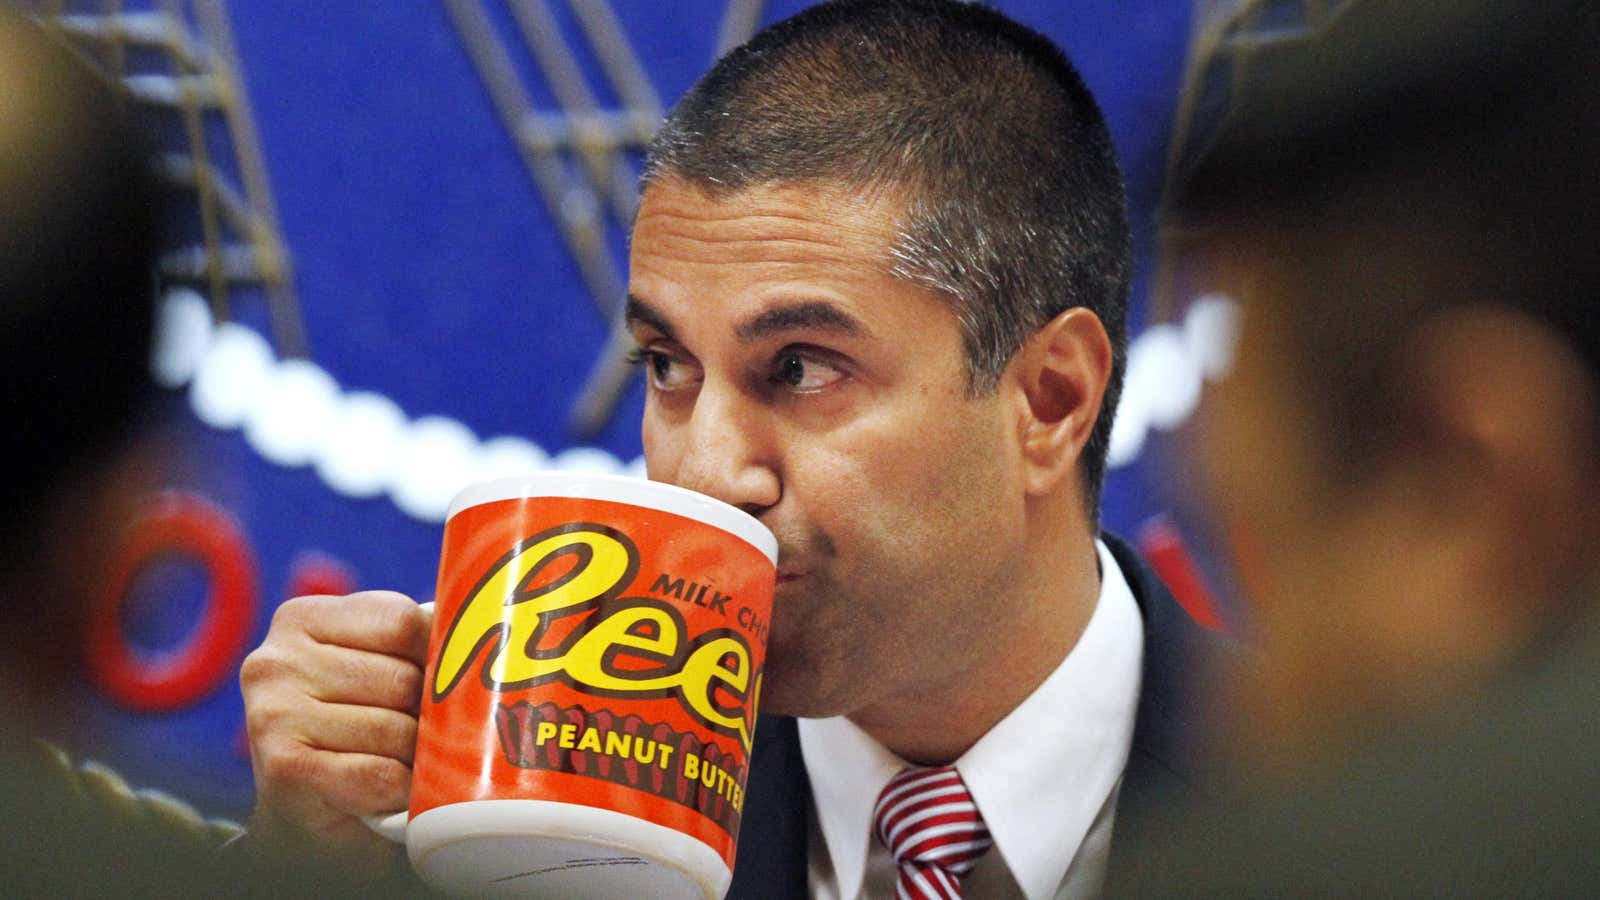 The internet was in danger well before Pai took aim at net neutrality.